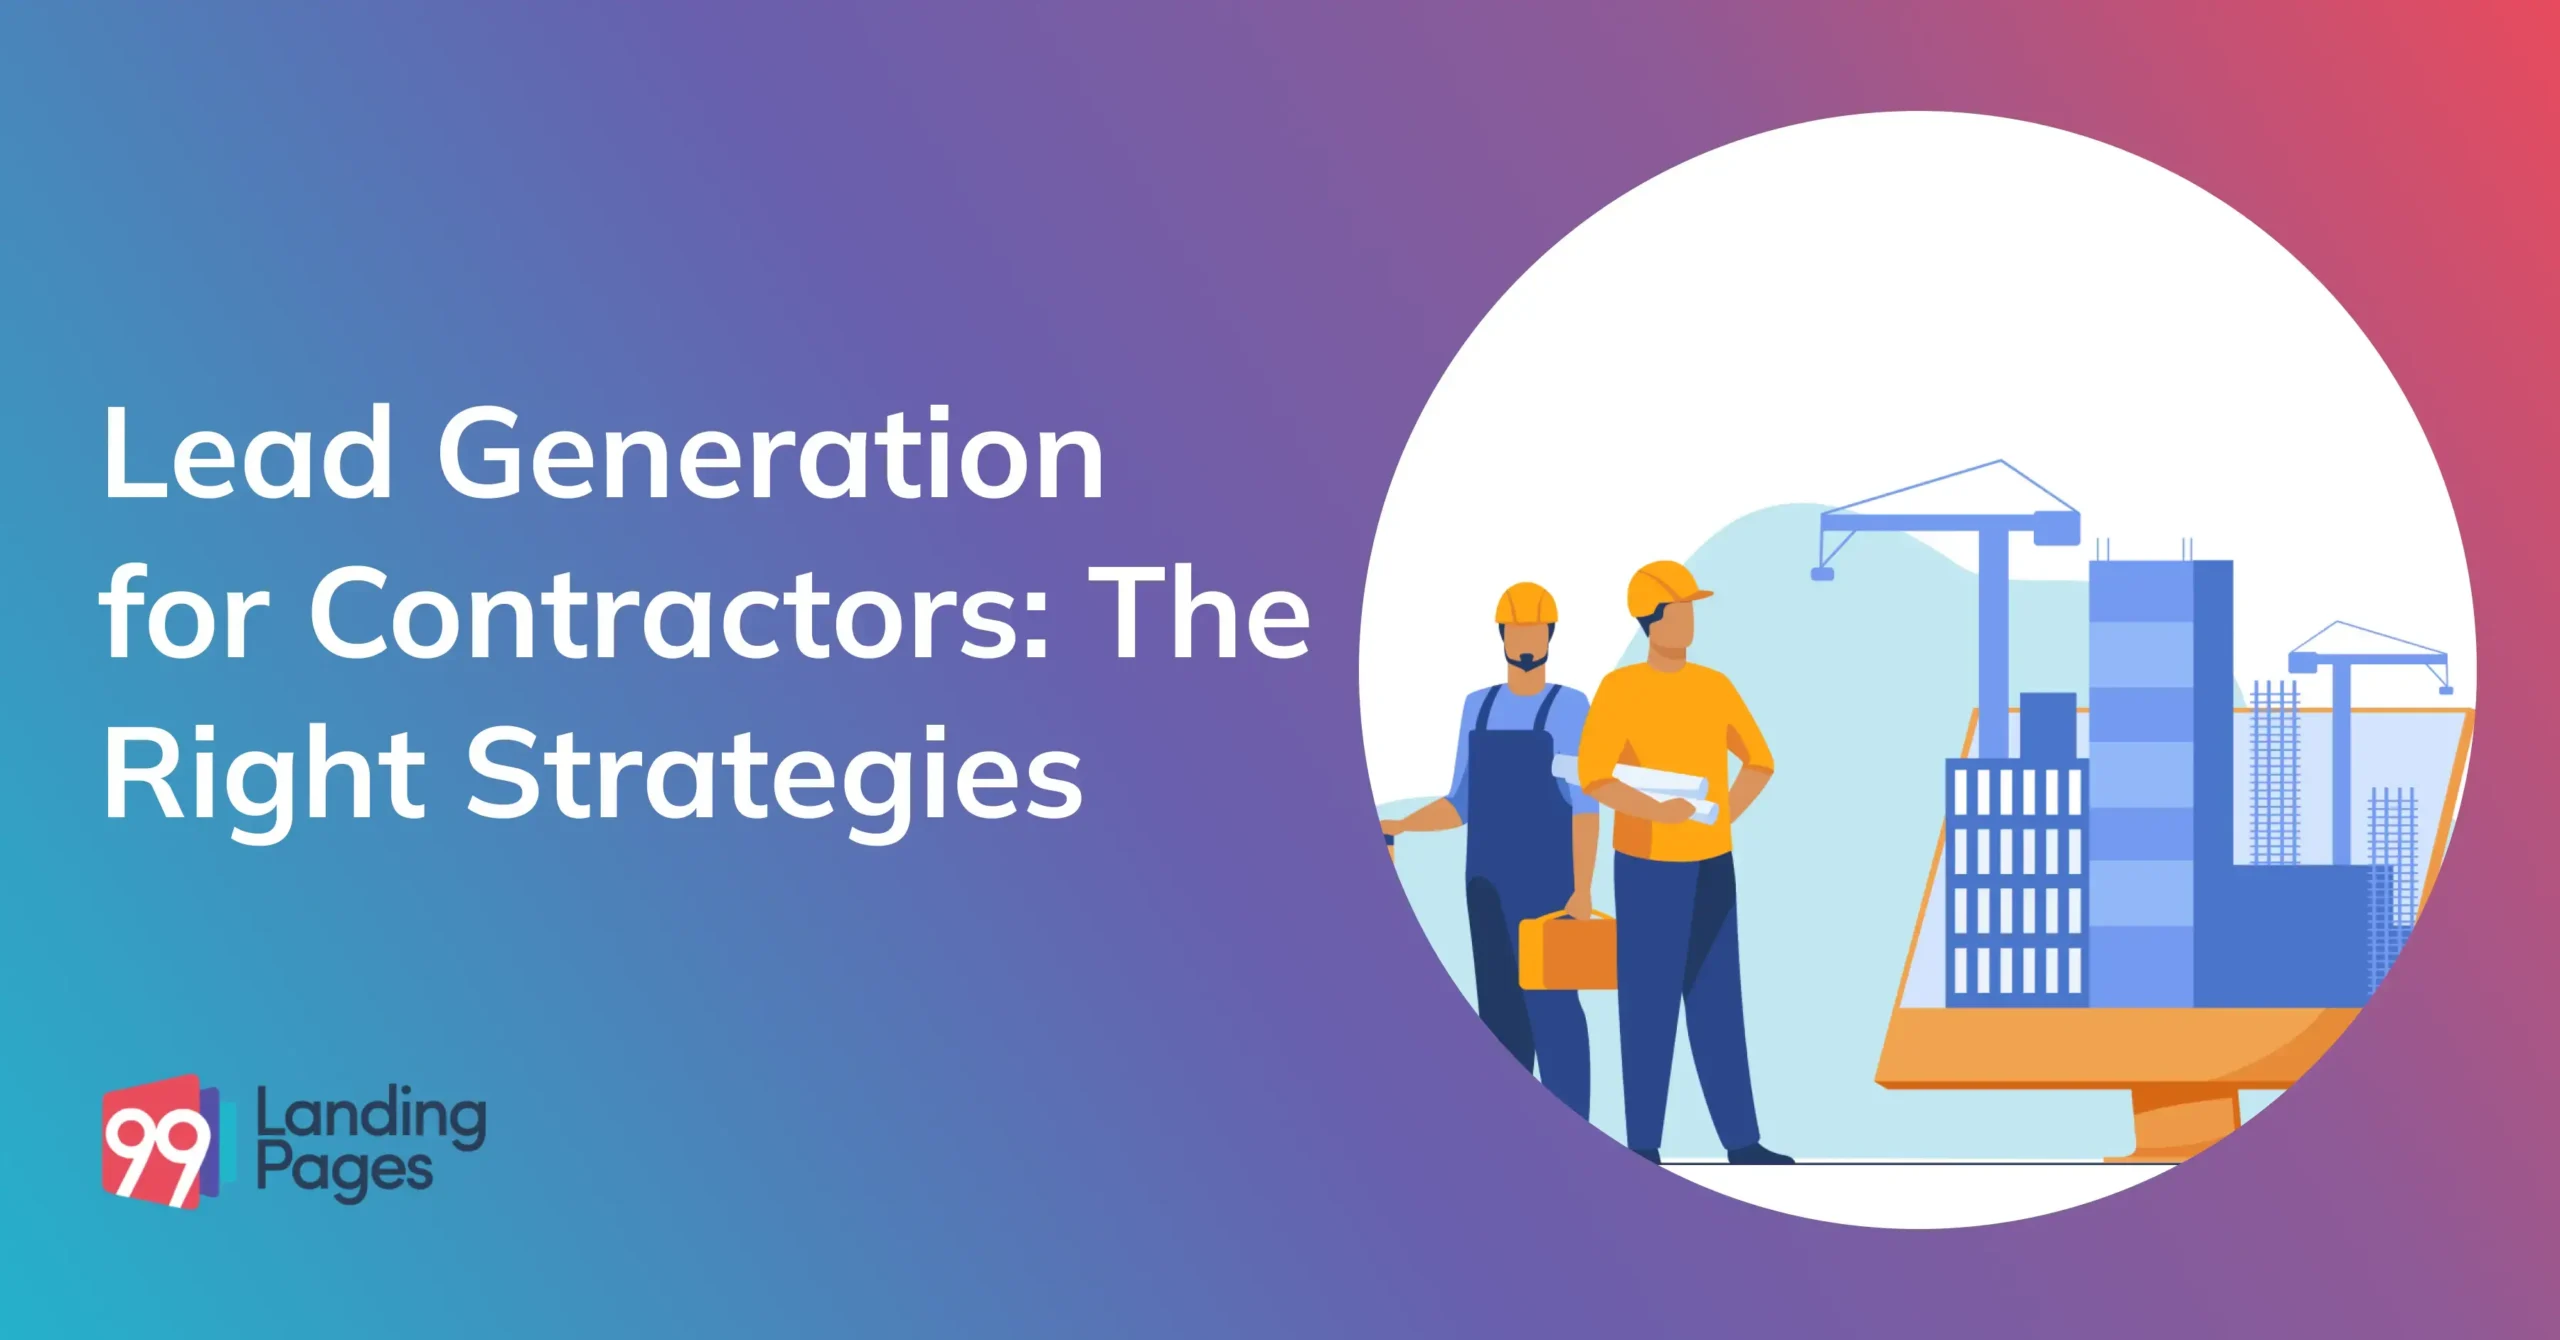 Lead Generation for Contractors: The Right Strategies